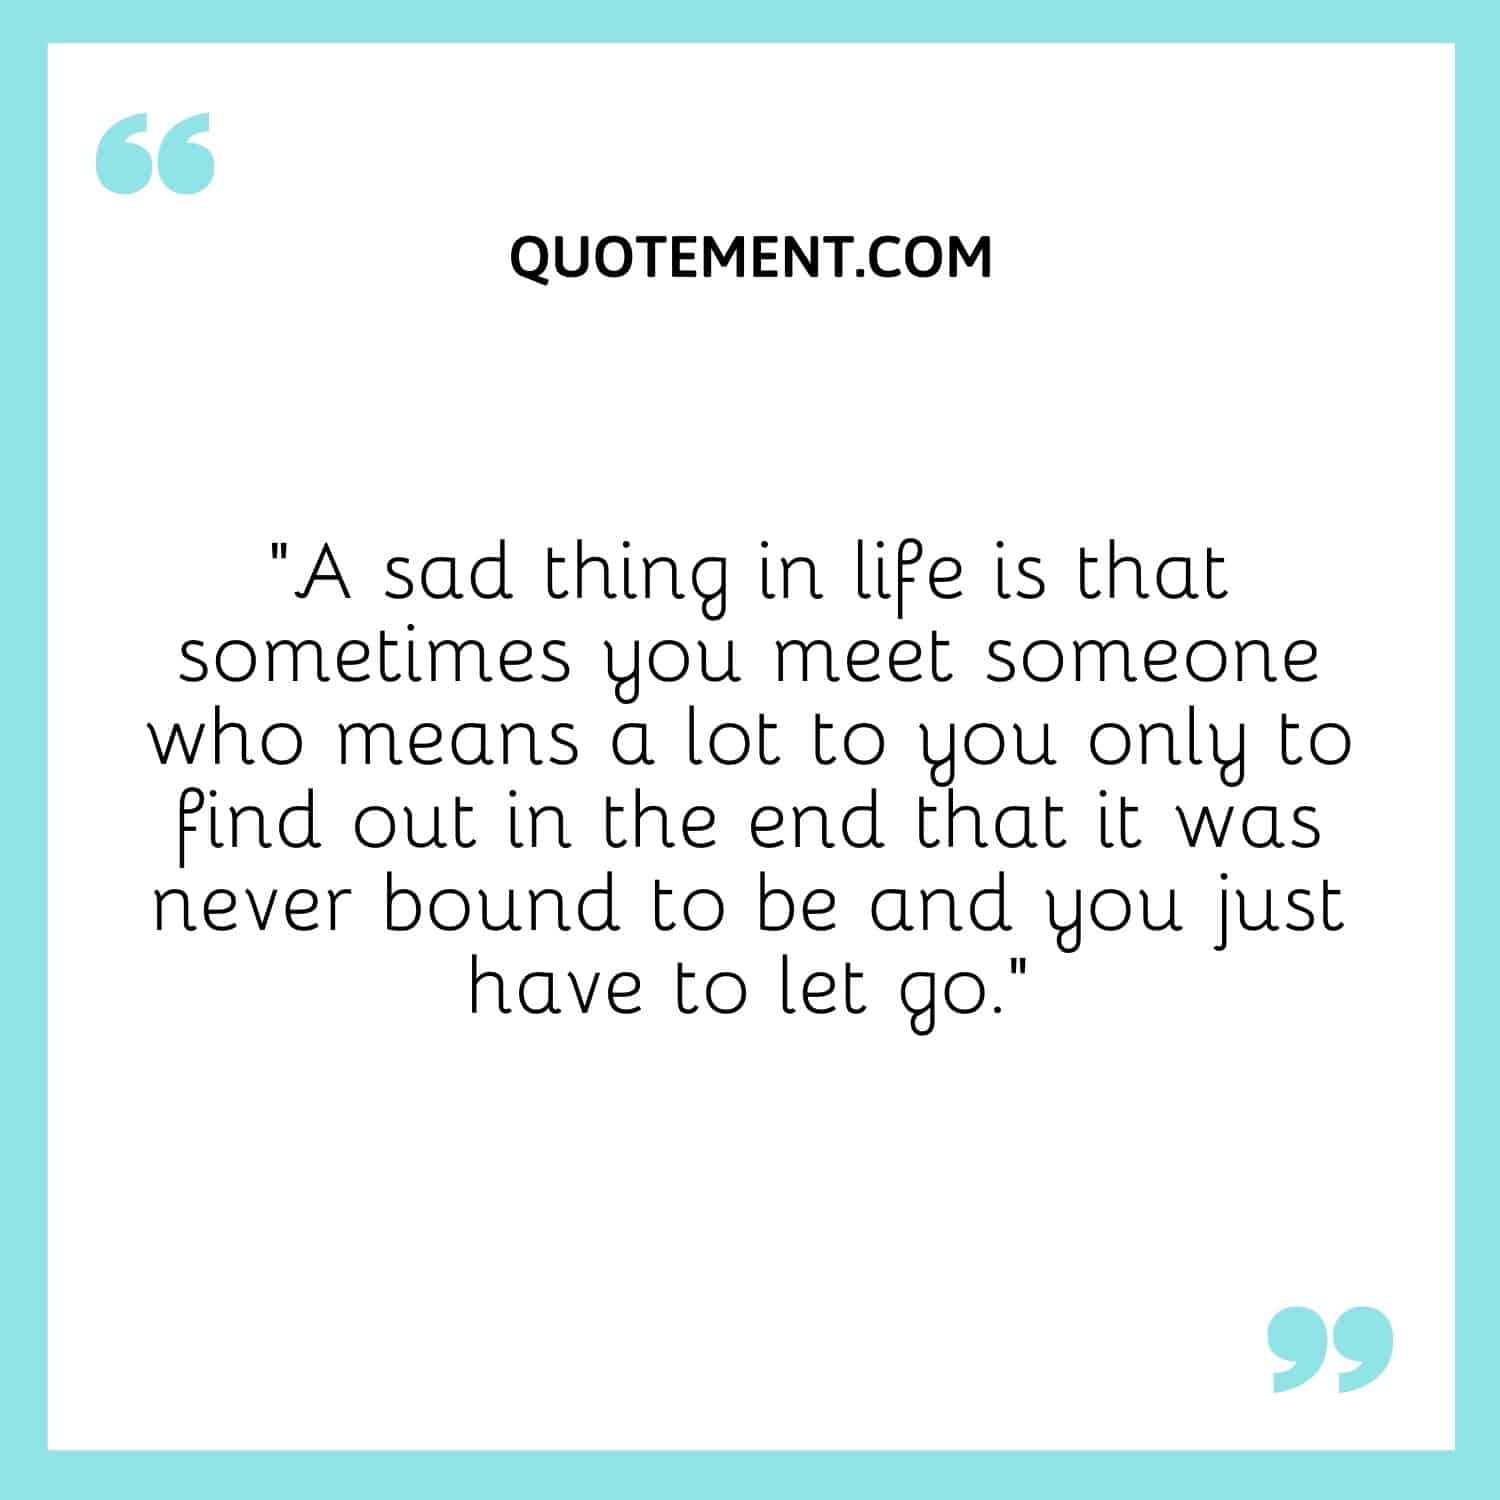 A sad thing in life is that sometimes you meet someone who means a lot to you only to find out in the end that it was never bound to be and you just have to let go